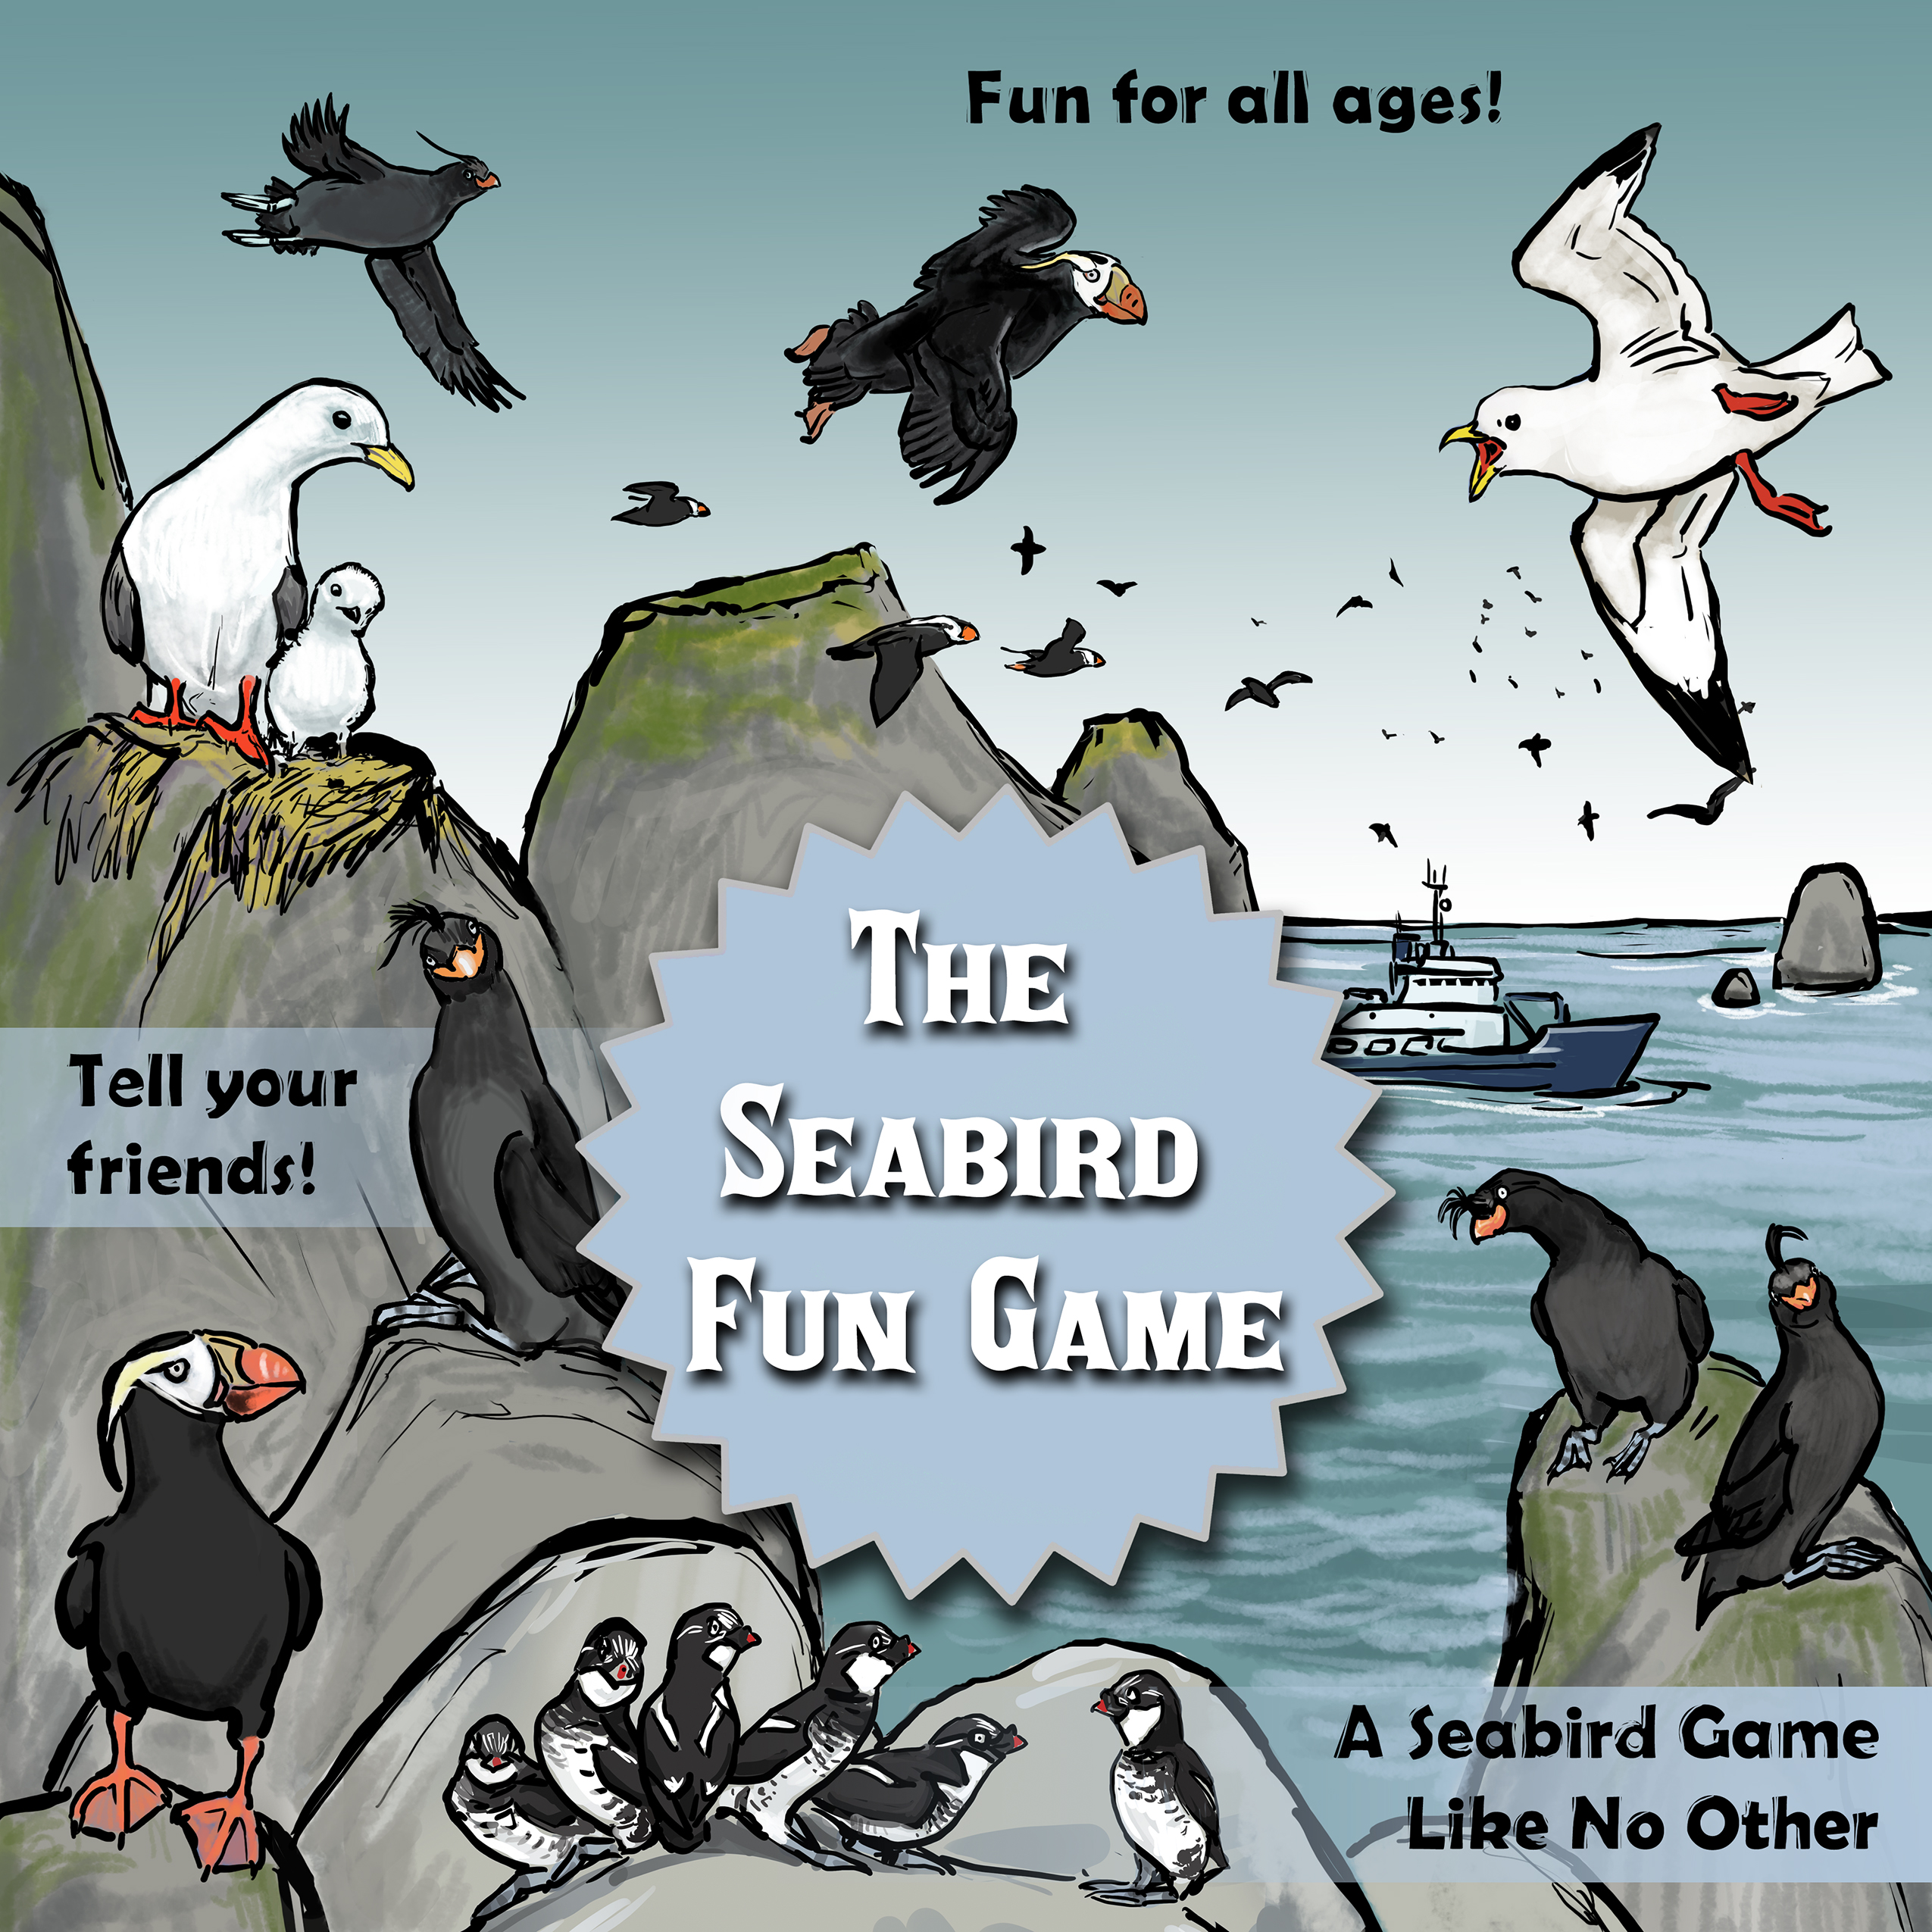 The Seabird Fun Game (1-4 players; ages 12+; 30-60 min)